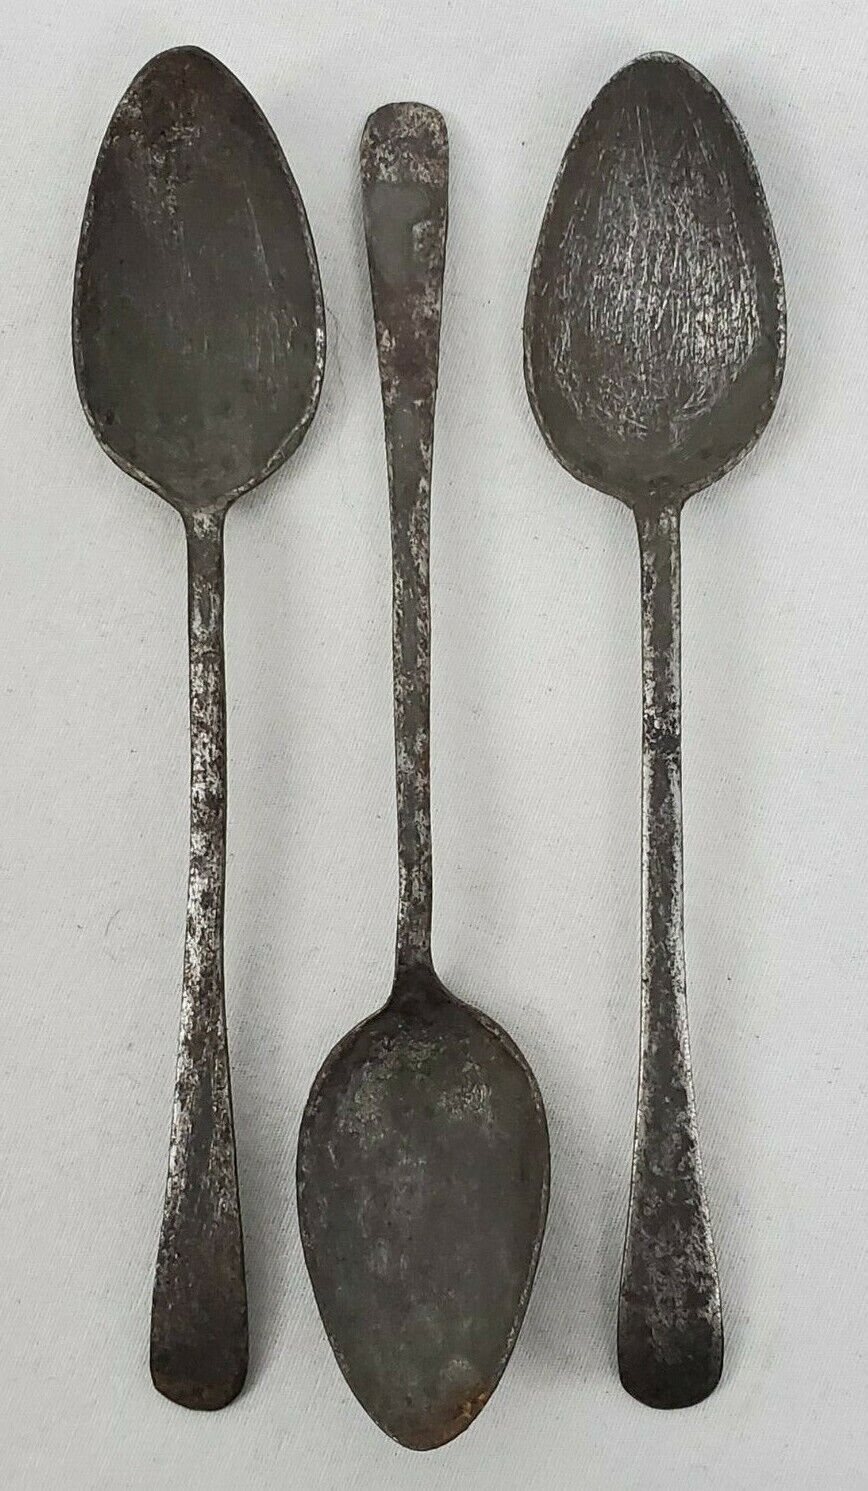 ANTIQUE/VINTAGE Lot of 3 Small Steel Demitasse Spoons Extreme Patina Privative